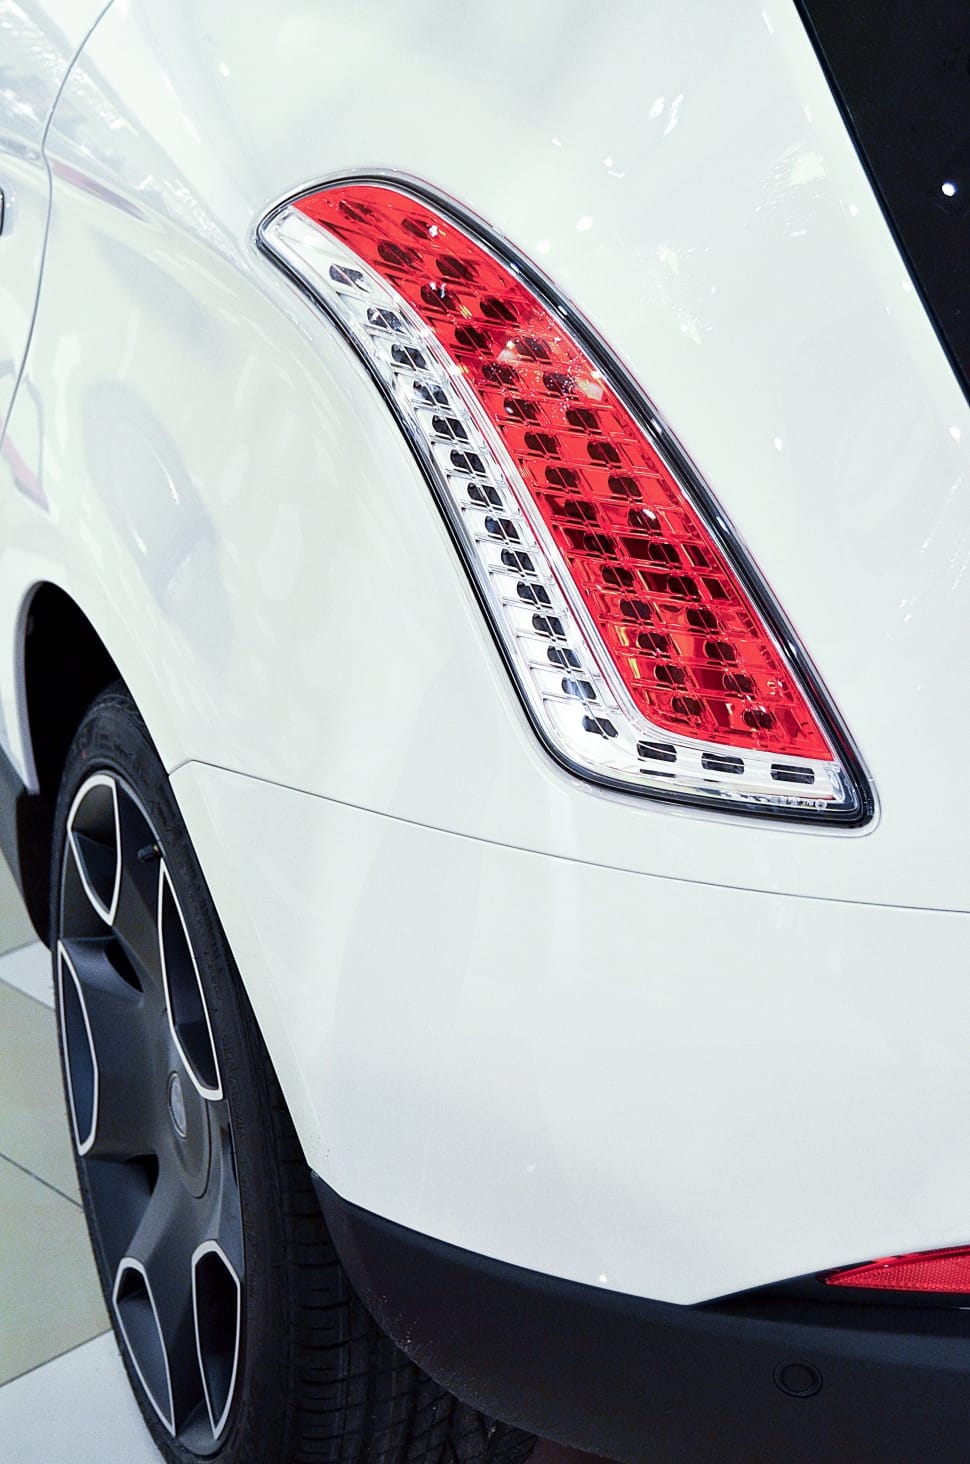 red and white car headlight preview